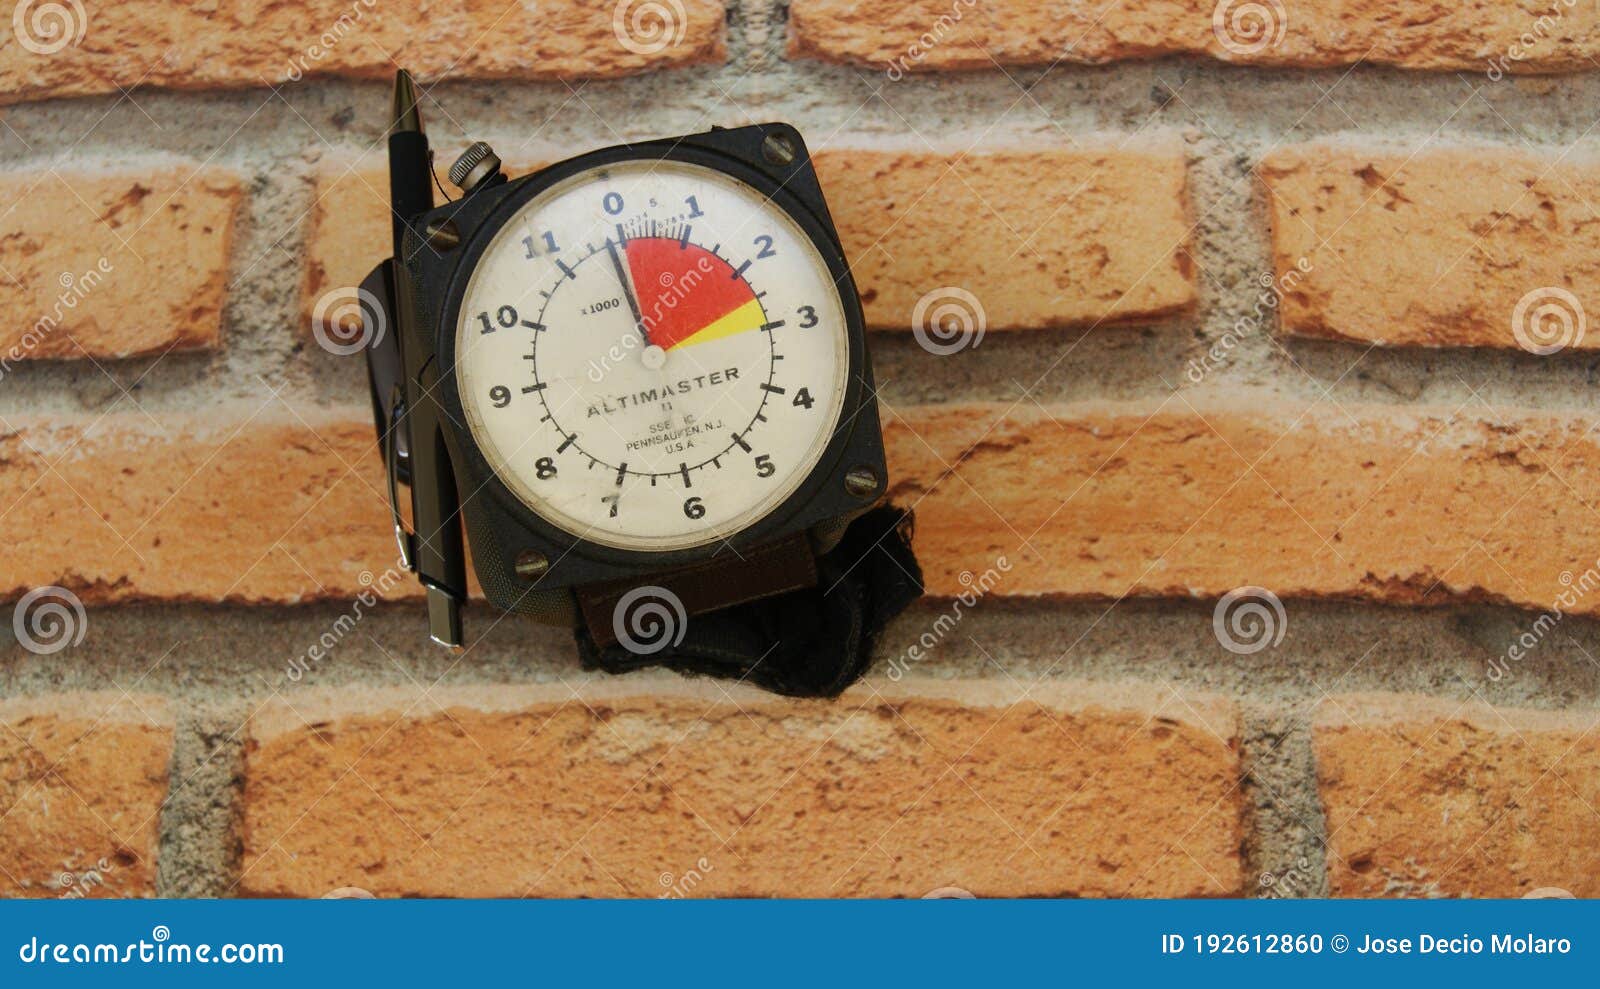 skydiving altimeter, used by skydiver, with a pen for annotation, brick background, top view, zoom photo